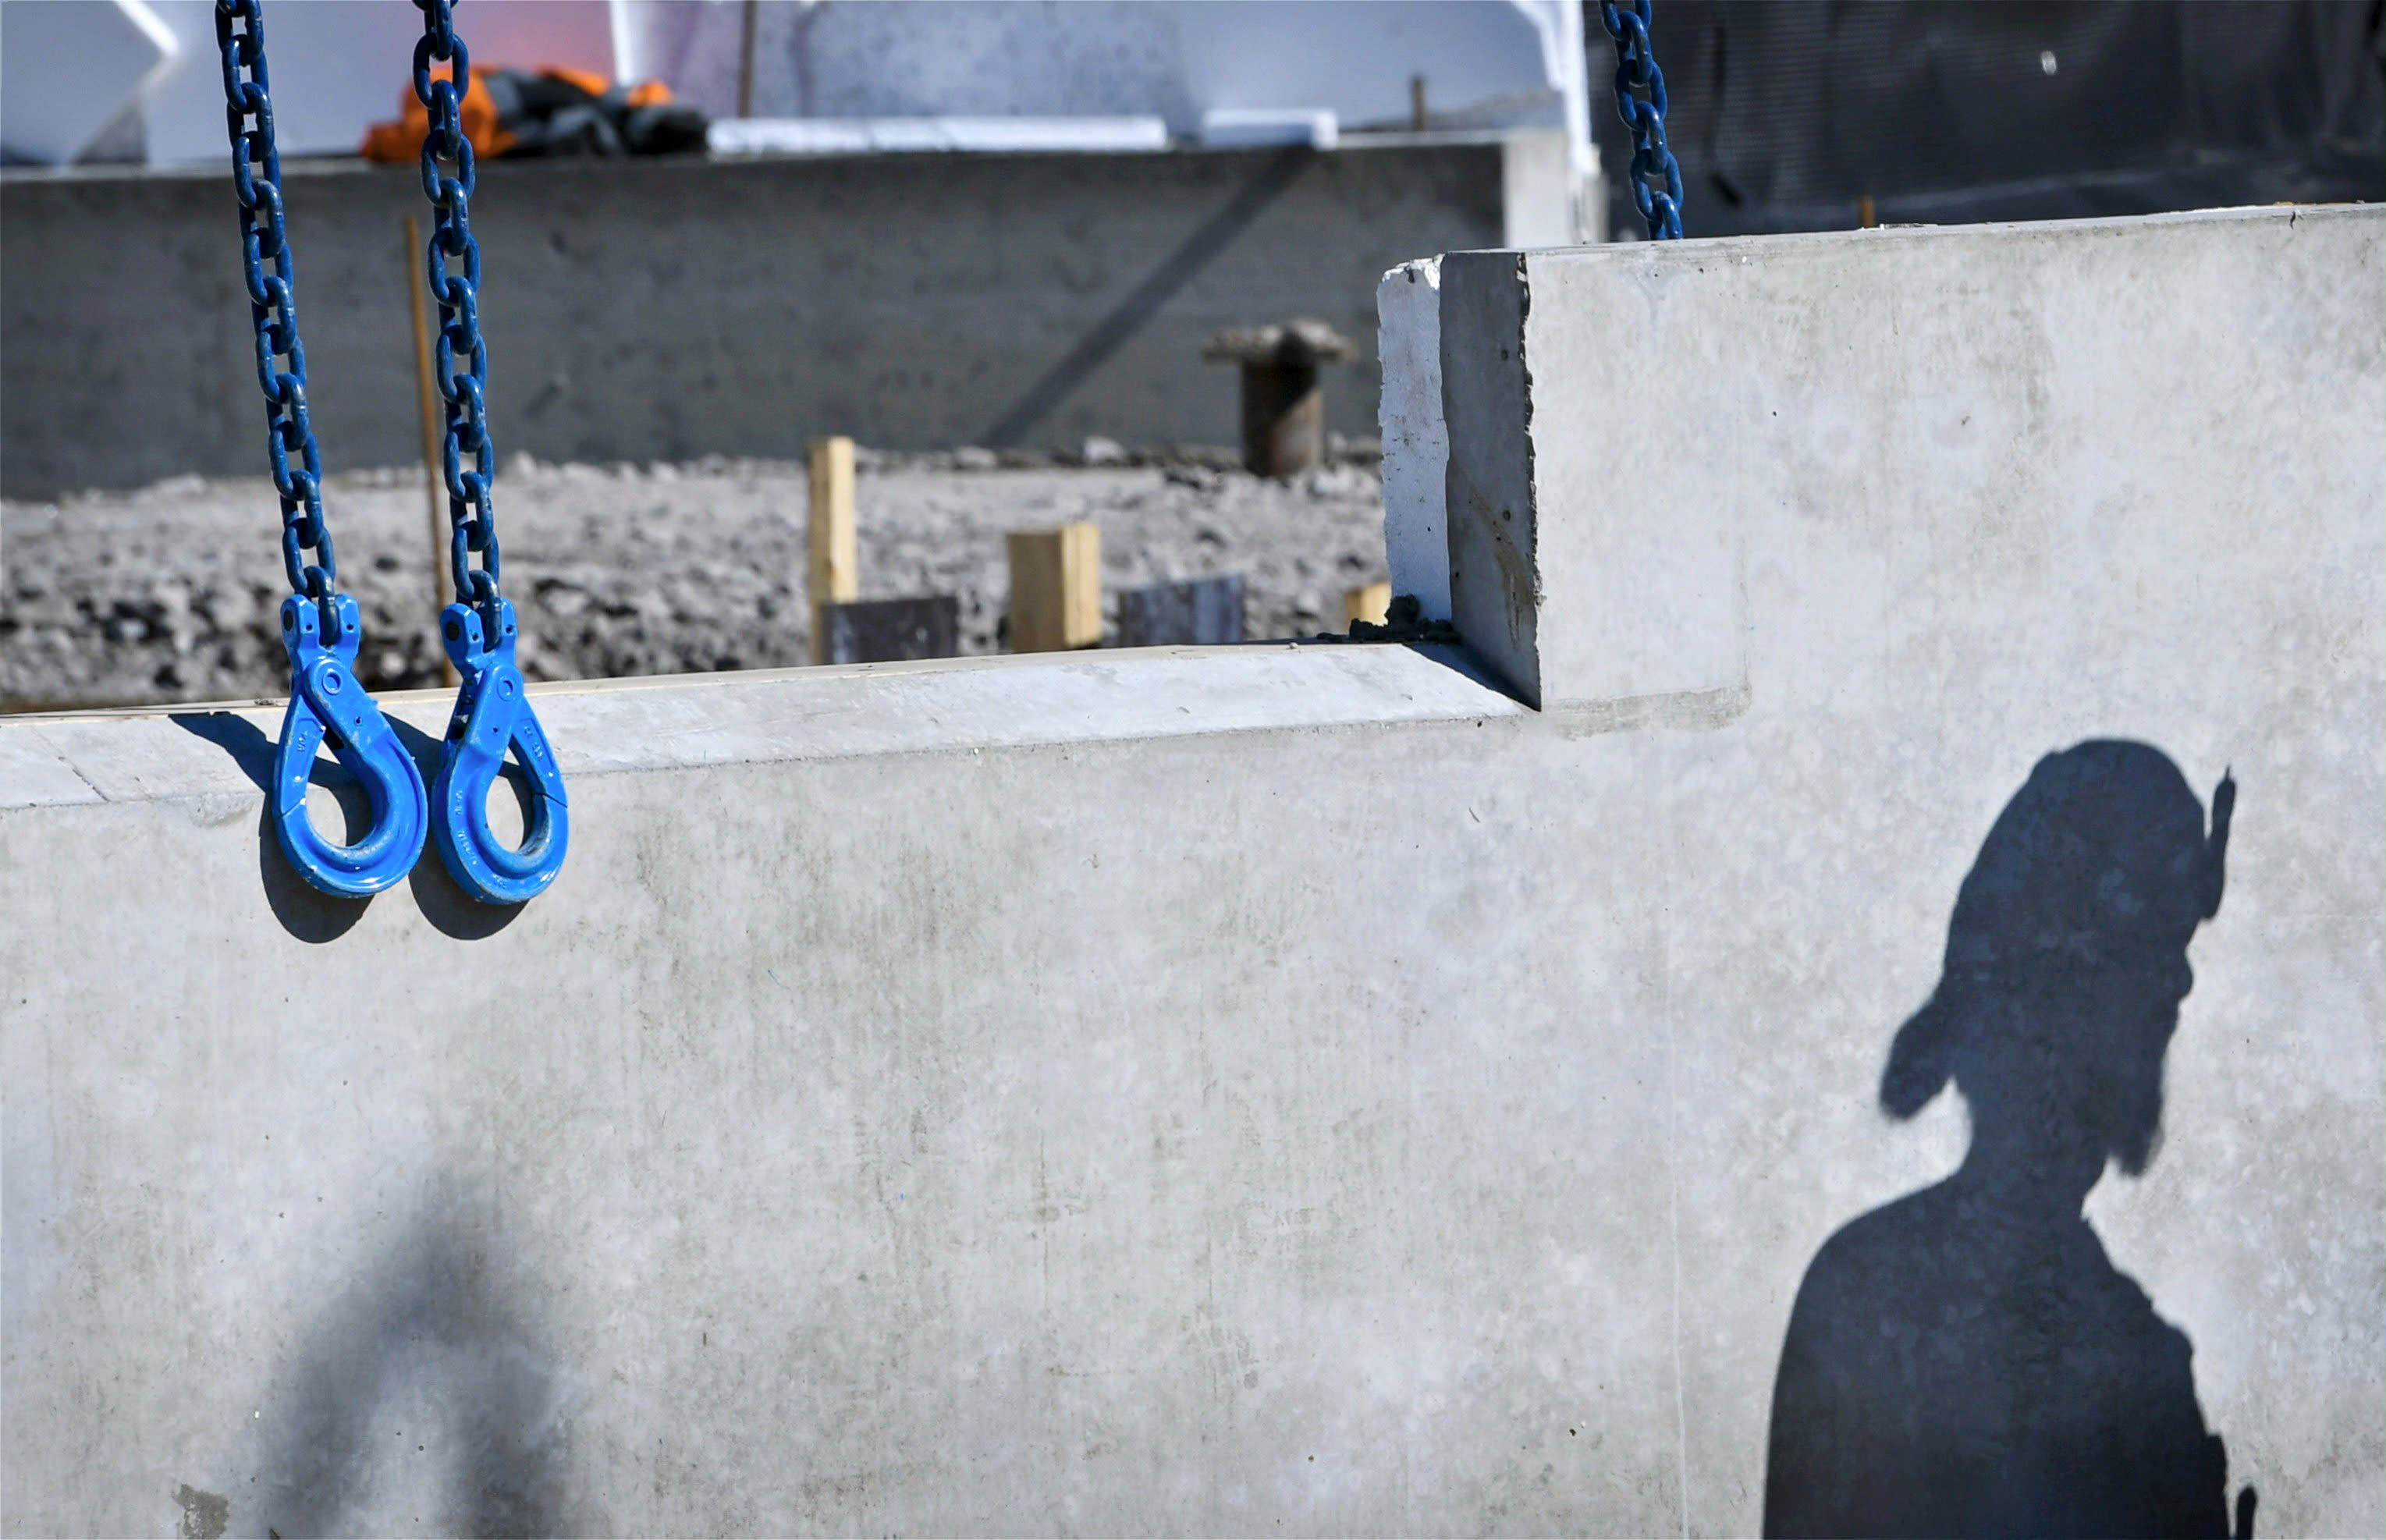 The police suspect human trafficking, forced labor in the Finnish construction industry